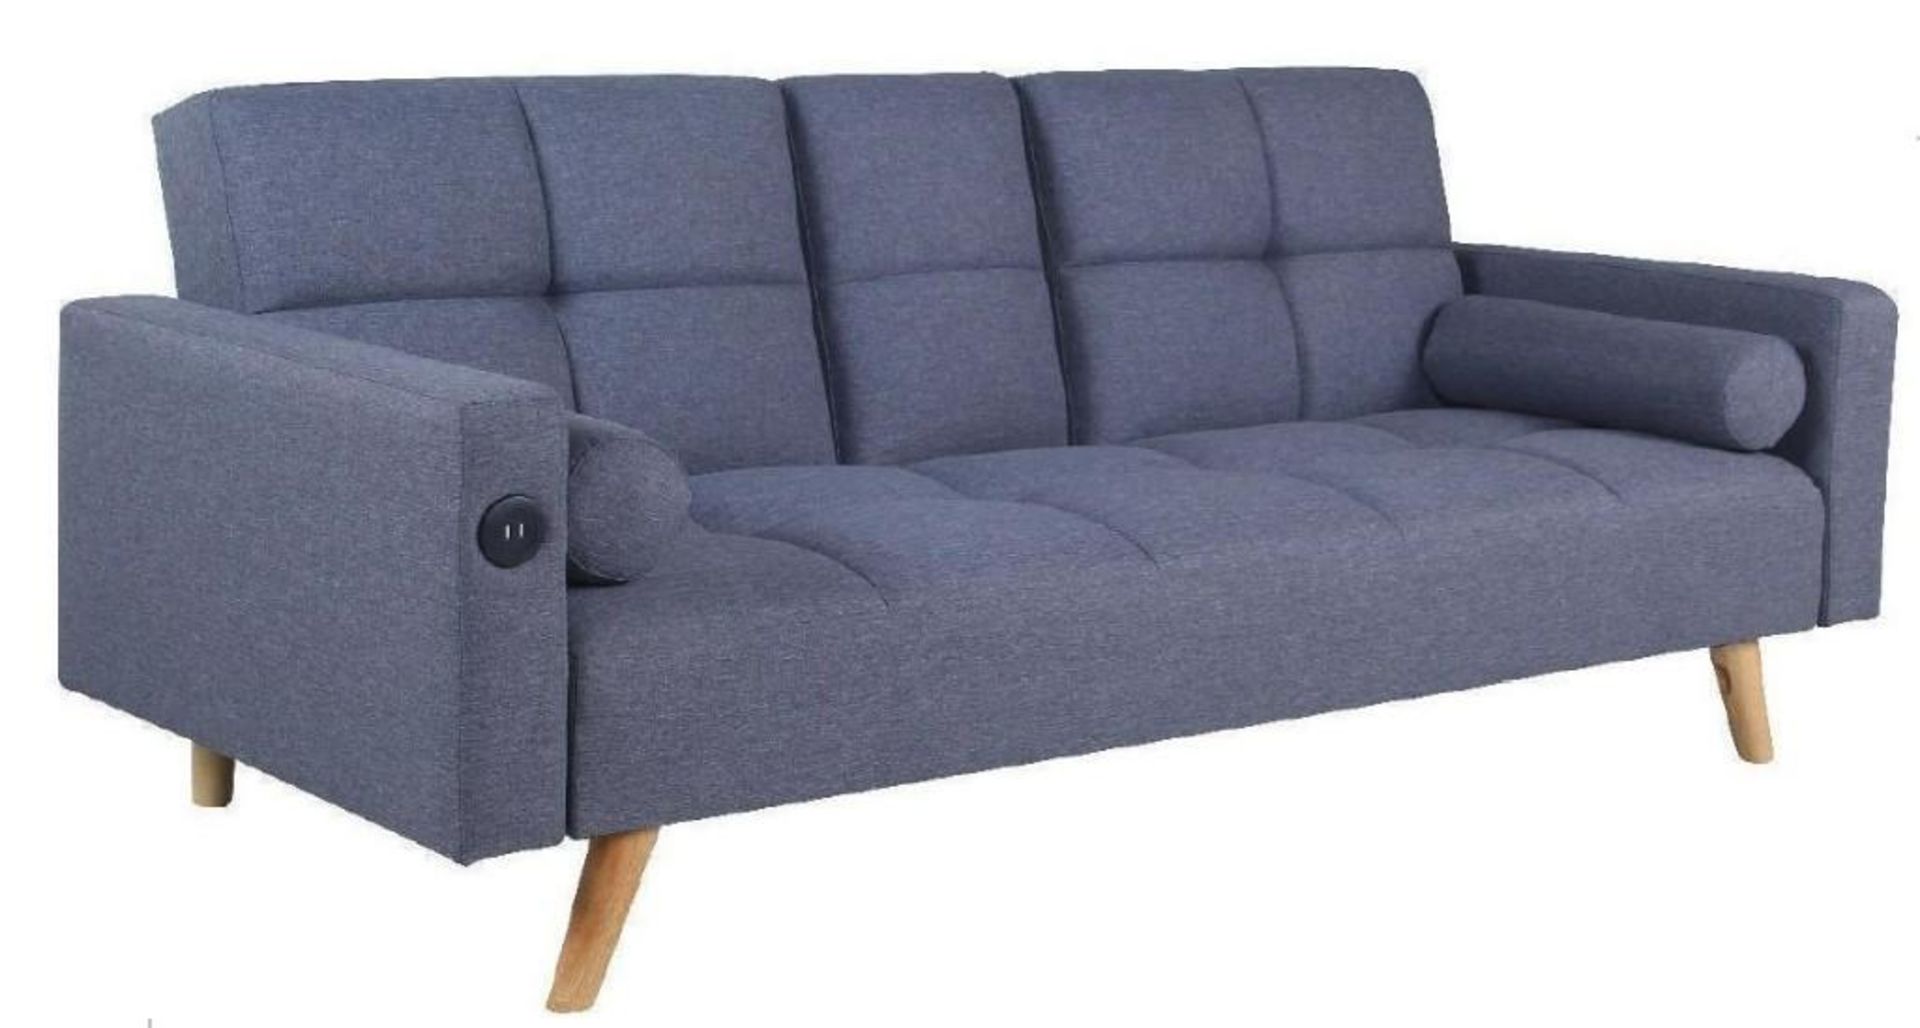 *NO VAT ON HAMMER* Brand new Boxed 2 Seater Clic Clac USB Sofa Bed